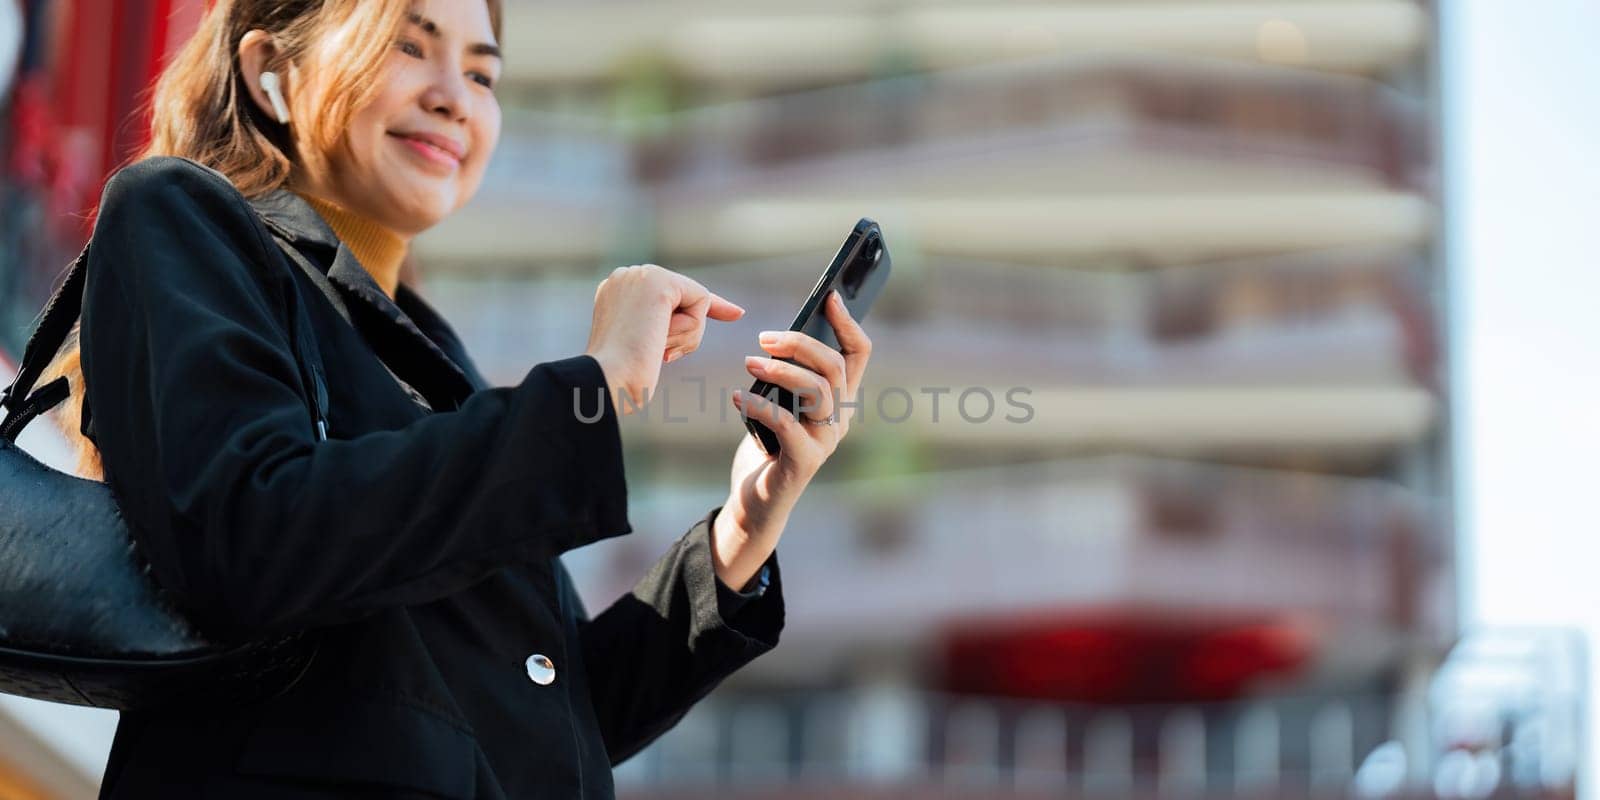 Asian professional businesswoman holding cellphone using smartphone standing or walking on big city urban street outside. Successful Asian business woman by nateemee